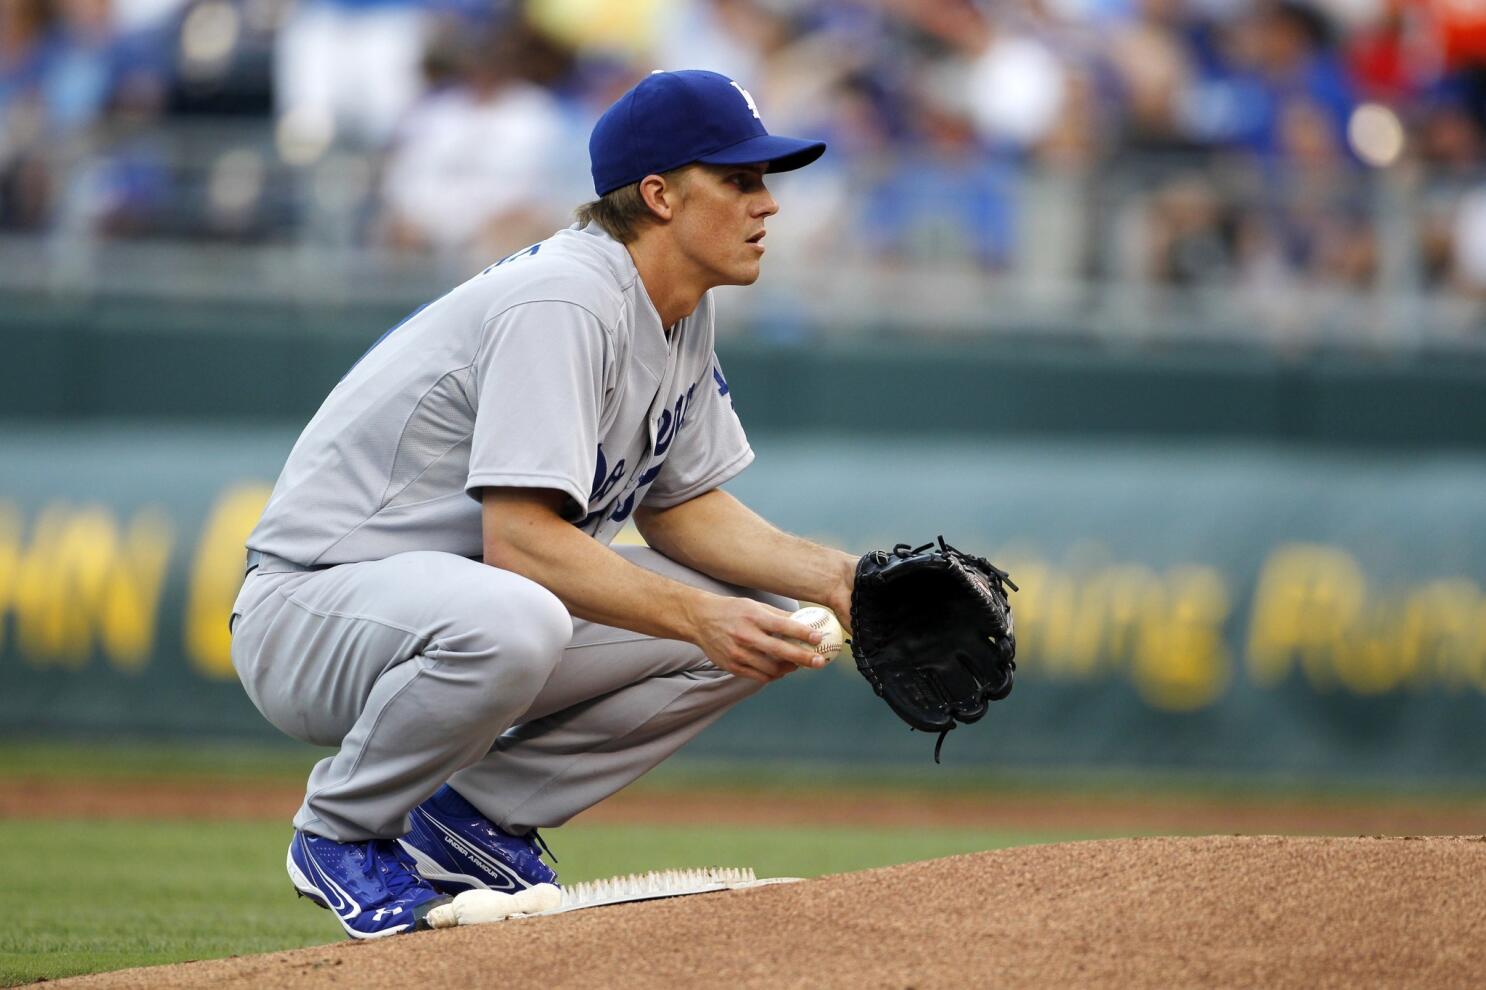 Pitcher Zack Greinke returns to Royals after 11 years - Sports Illustrated